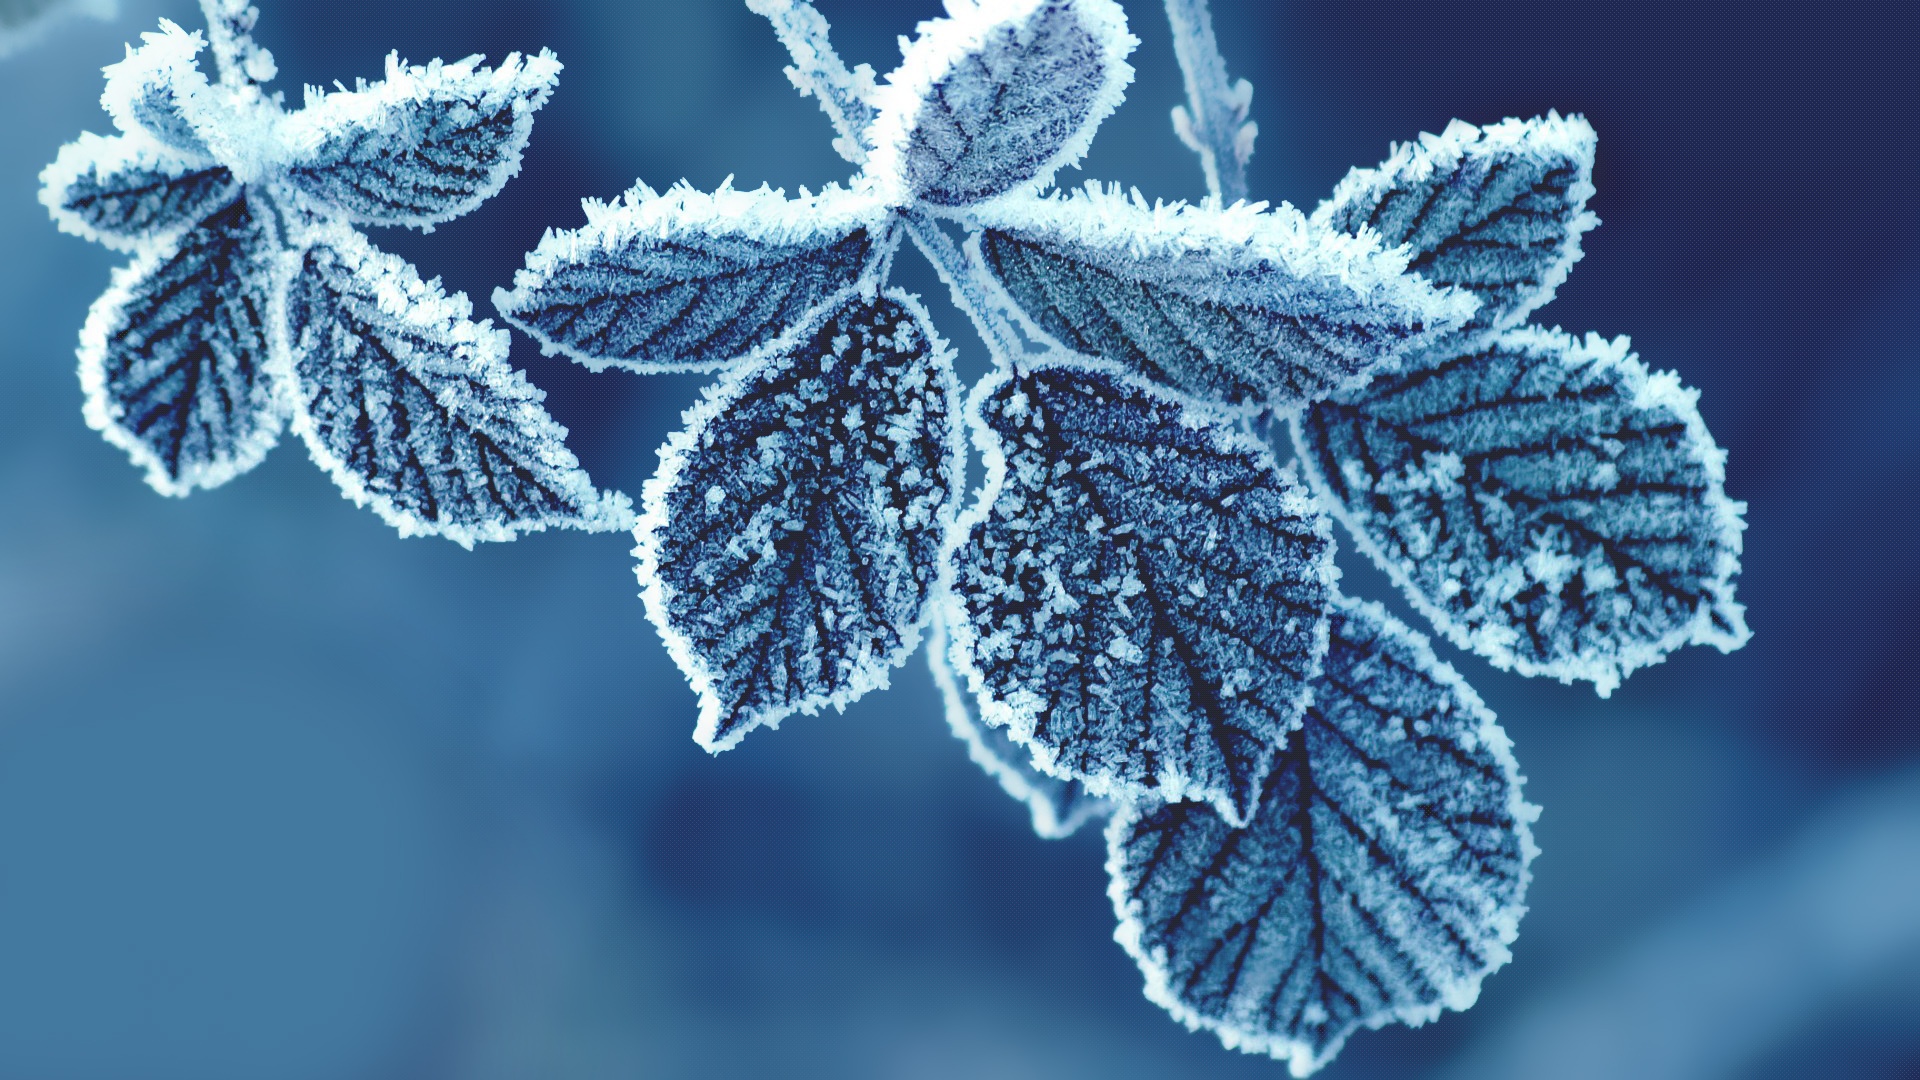 Cold Leaves Wallpaper in jpg format for free download